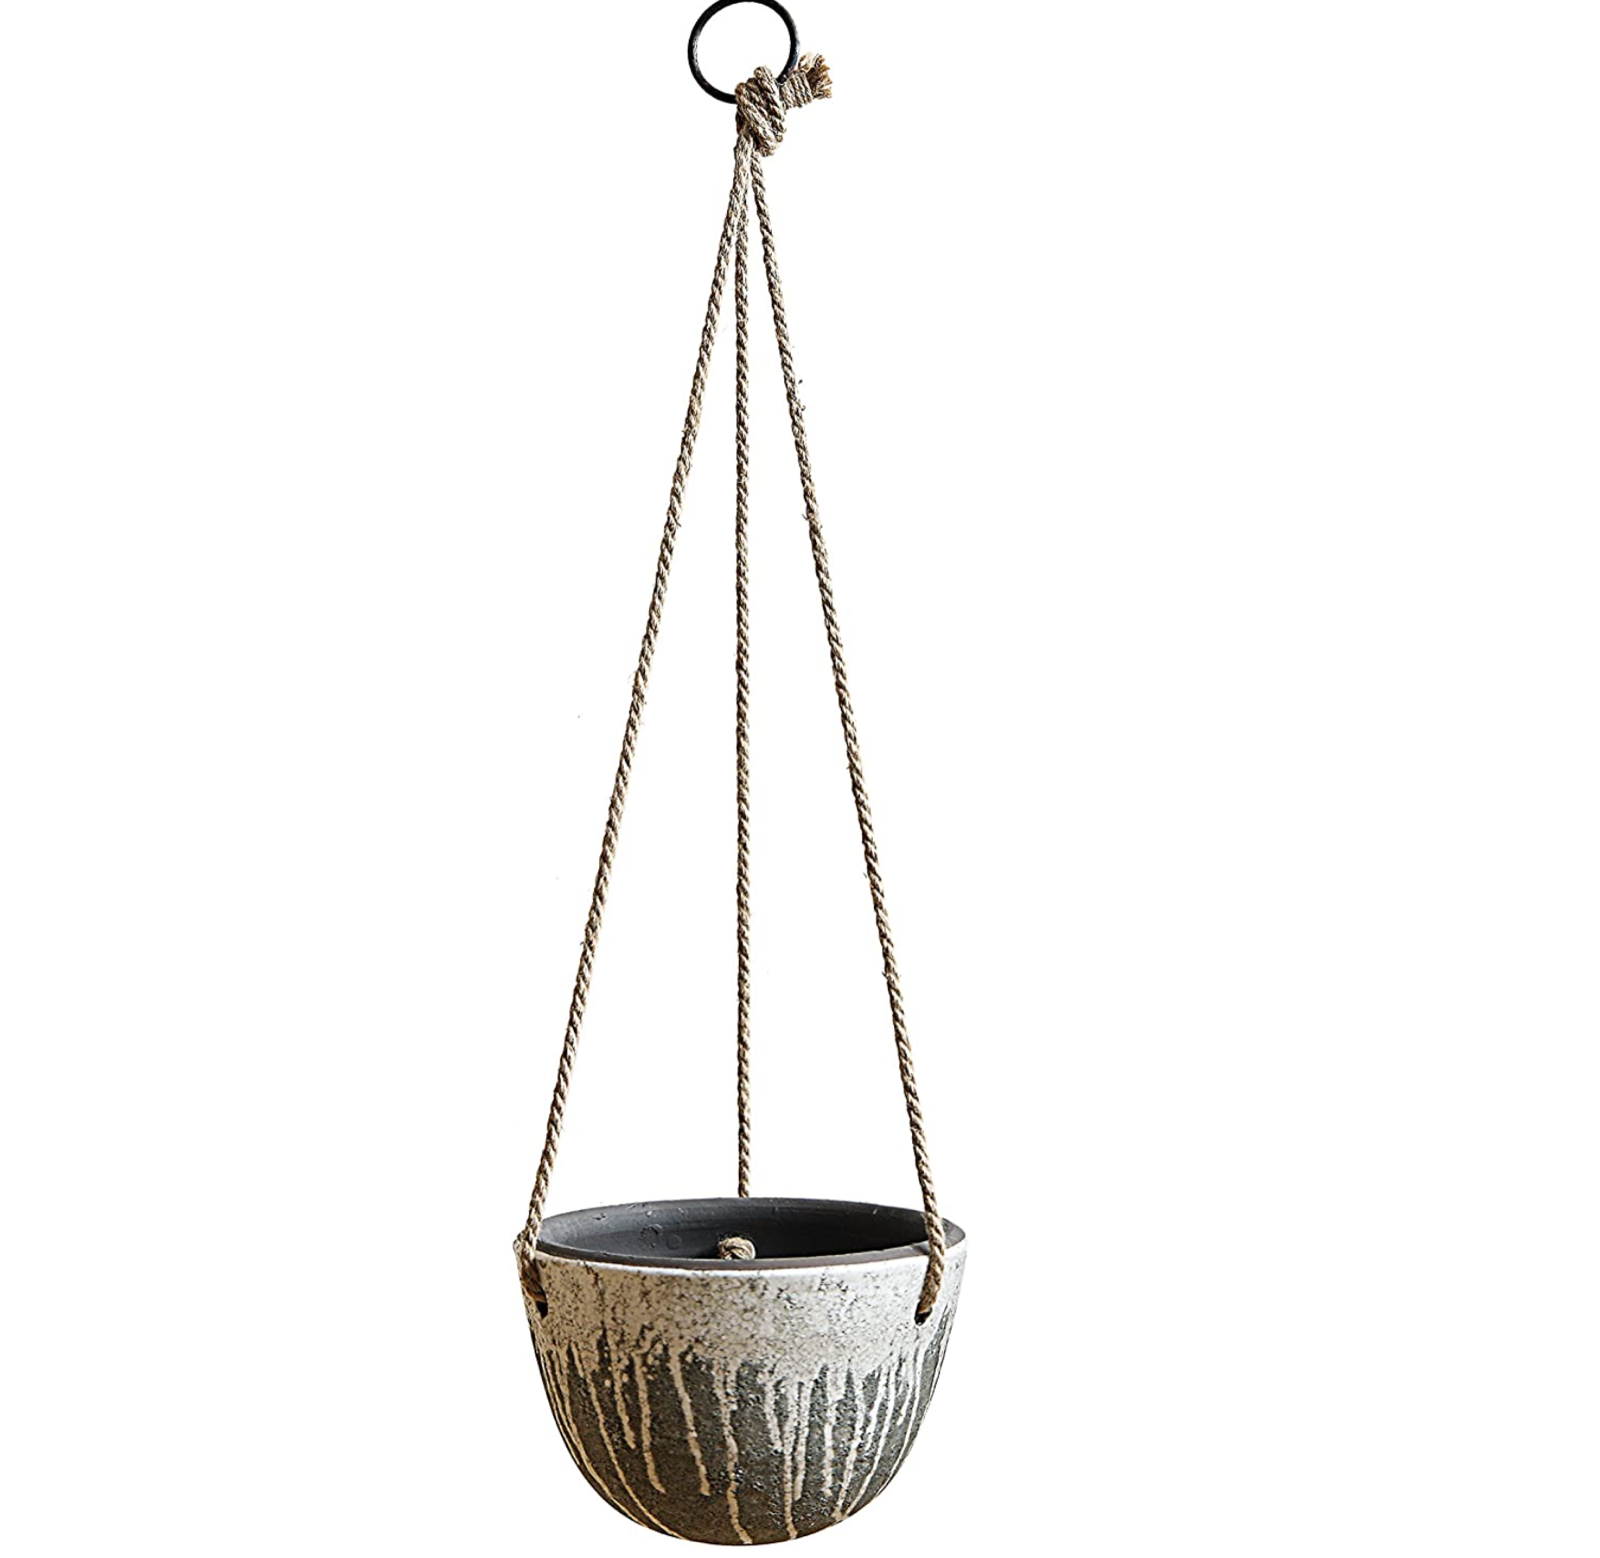 Primary image for Creative Co-op Distressed Green & White Hanging Terracotta Planter